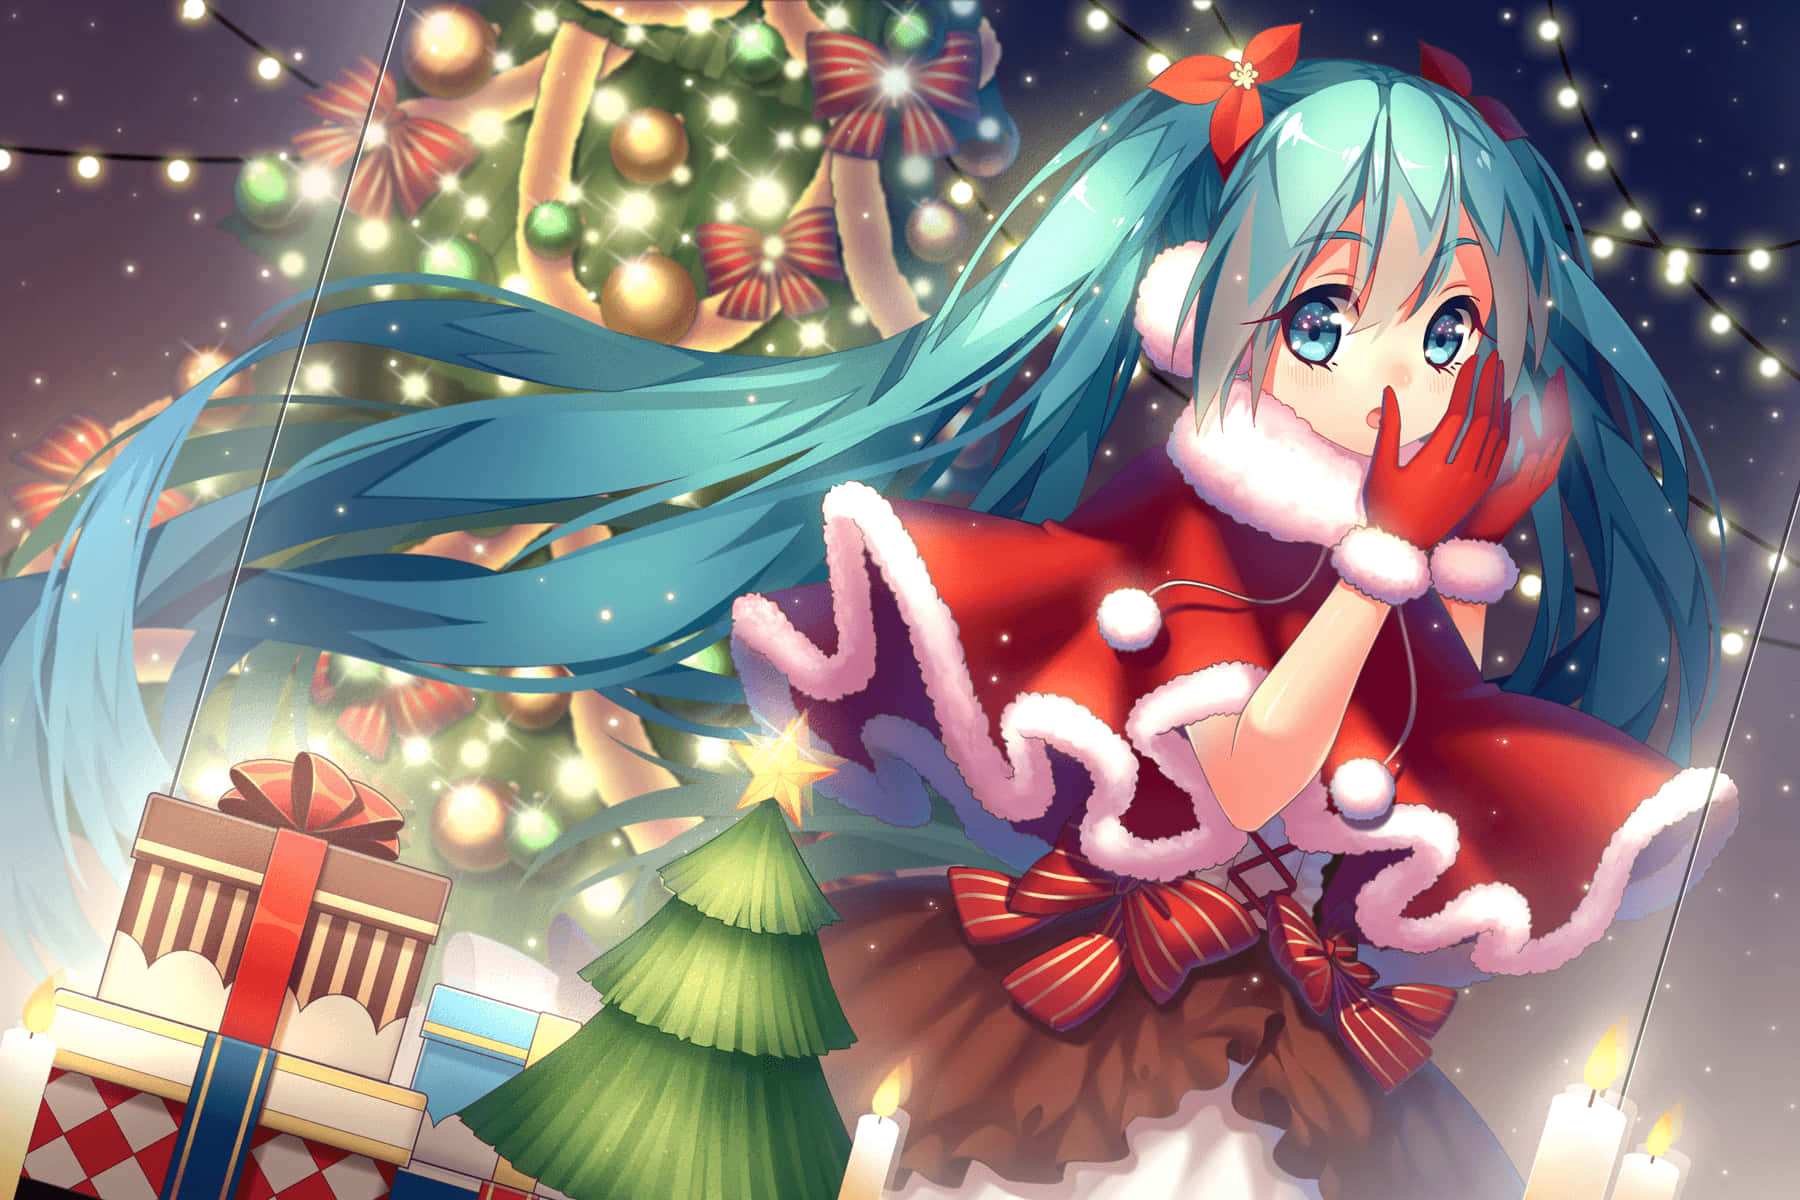 Celebrate Christmas with your favourite anime characters!